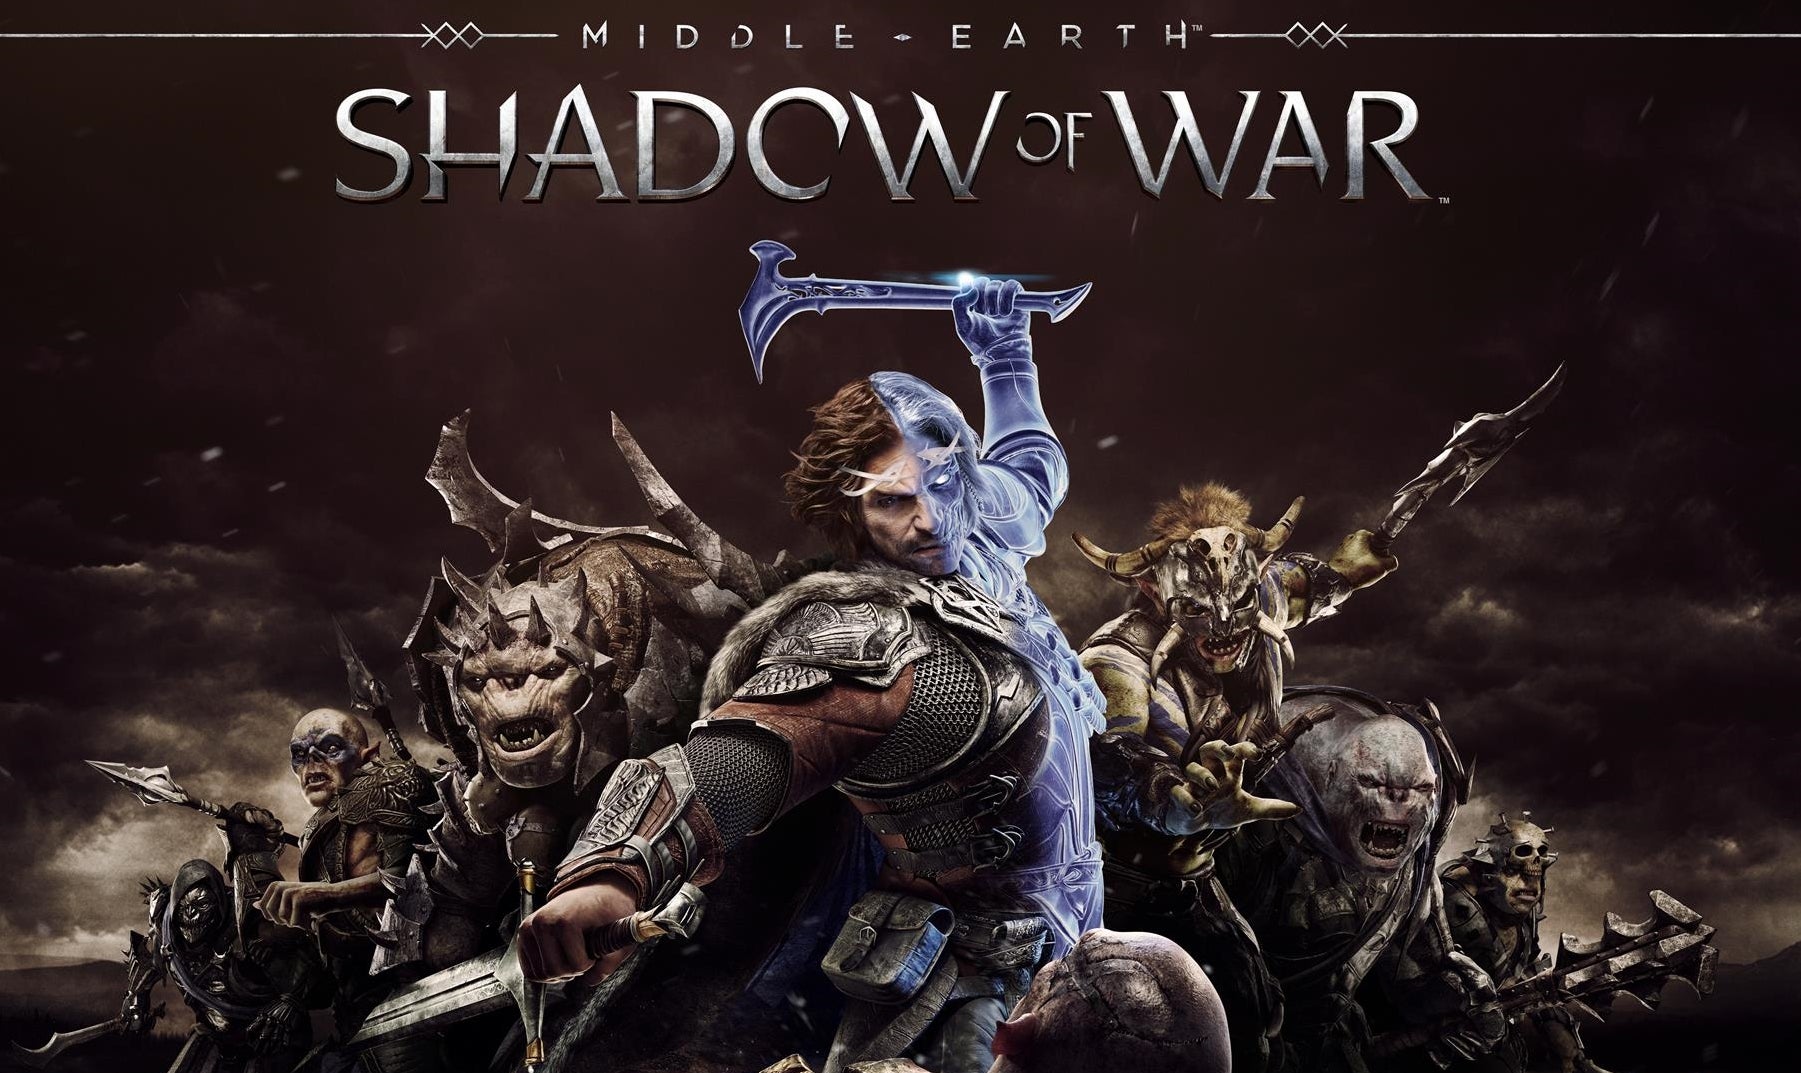 Image for Middle-earth: Shadow of War video shows much bigger emphasis on loot, gear customisation